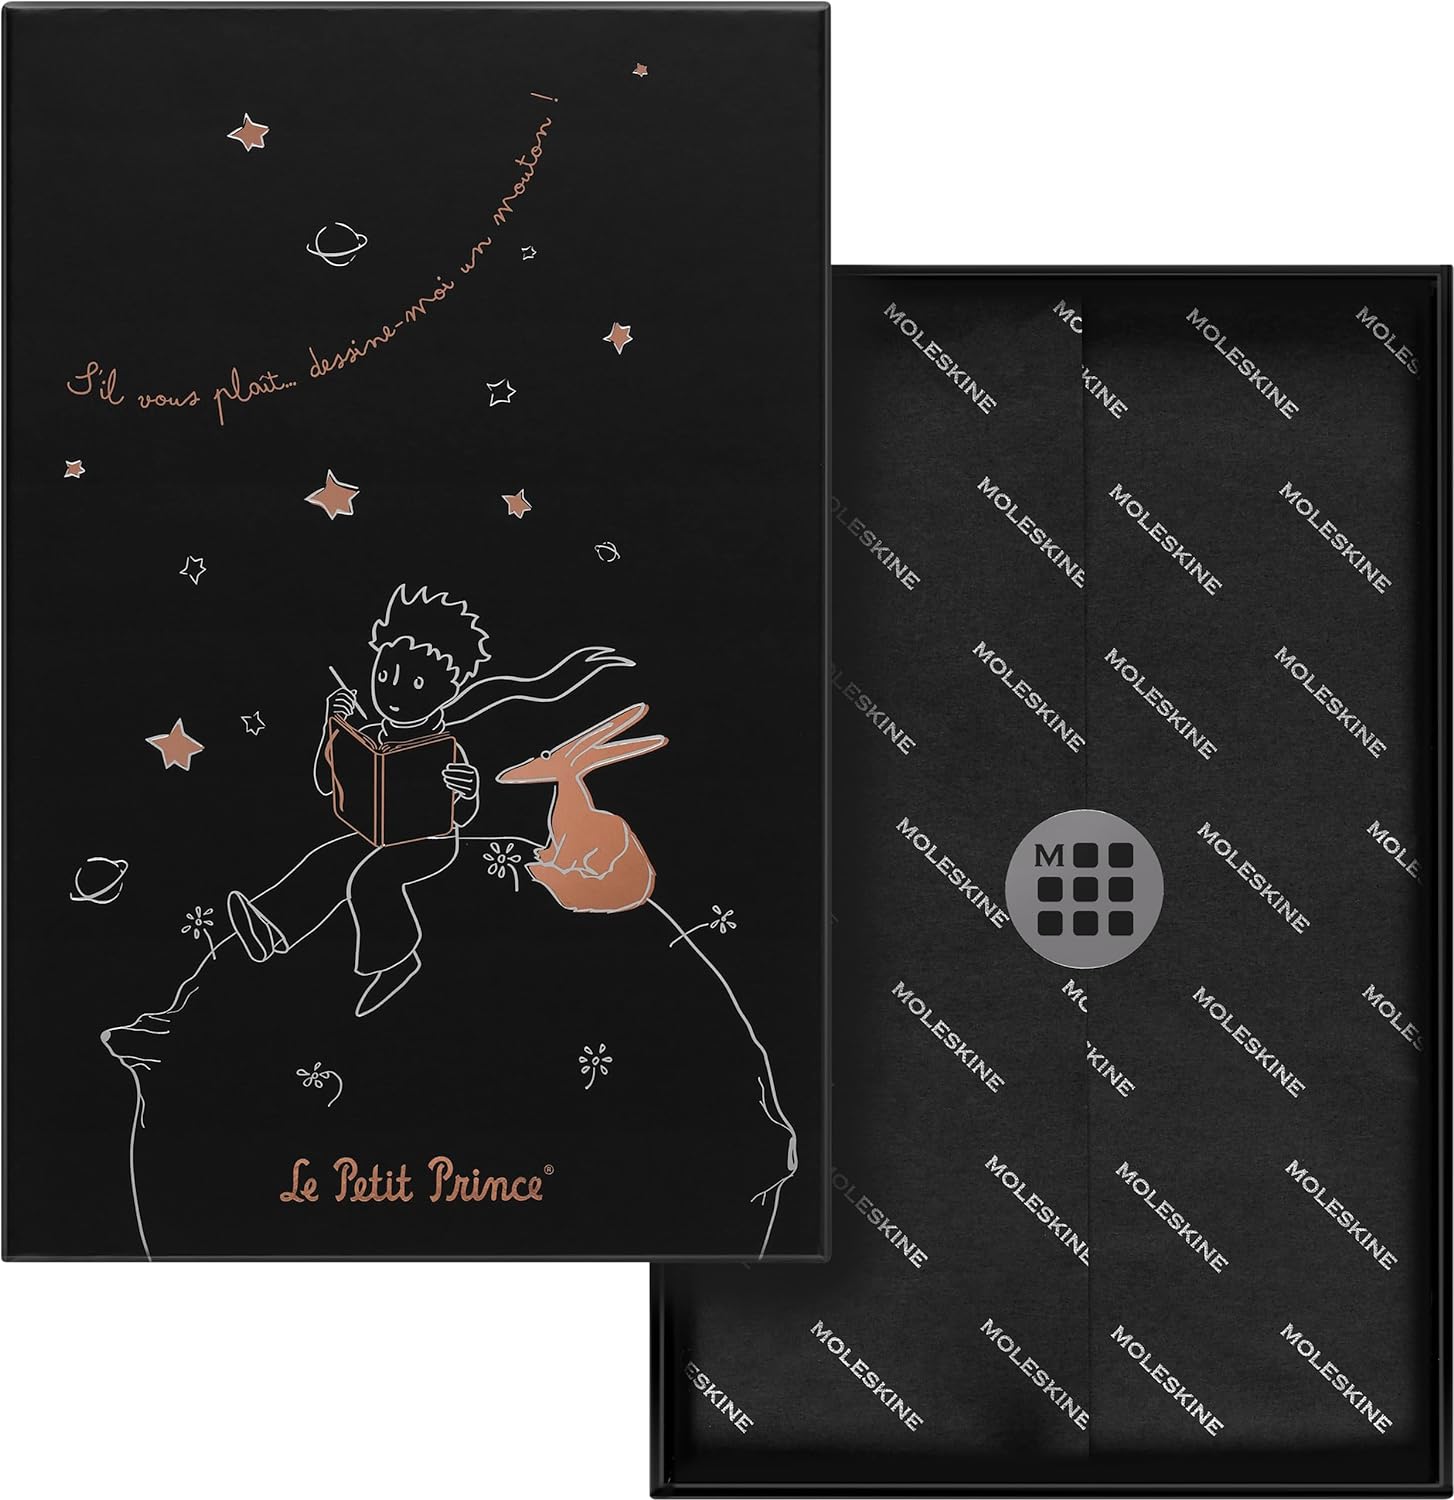 Carnet - Le Petit Prince with Gift Box - Large, Hard Cover, Ruled - Limited Edition